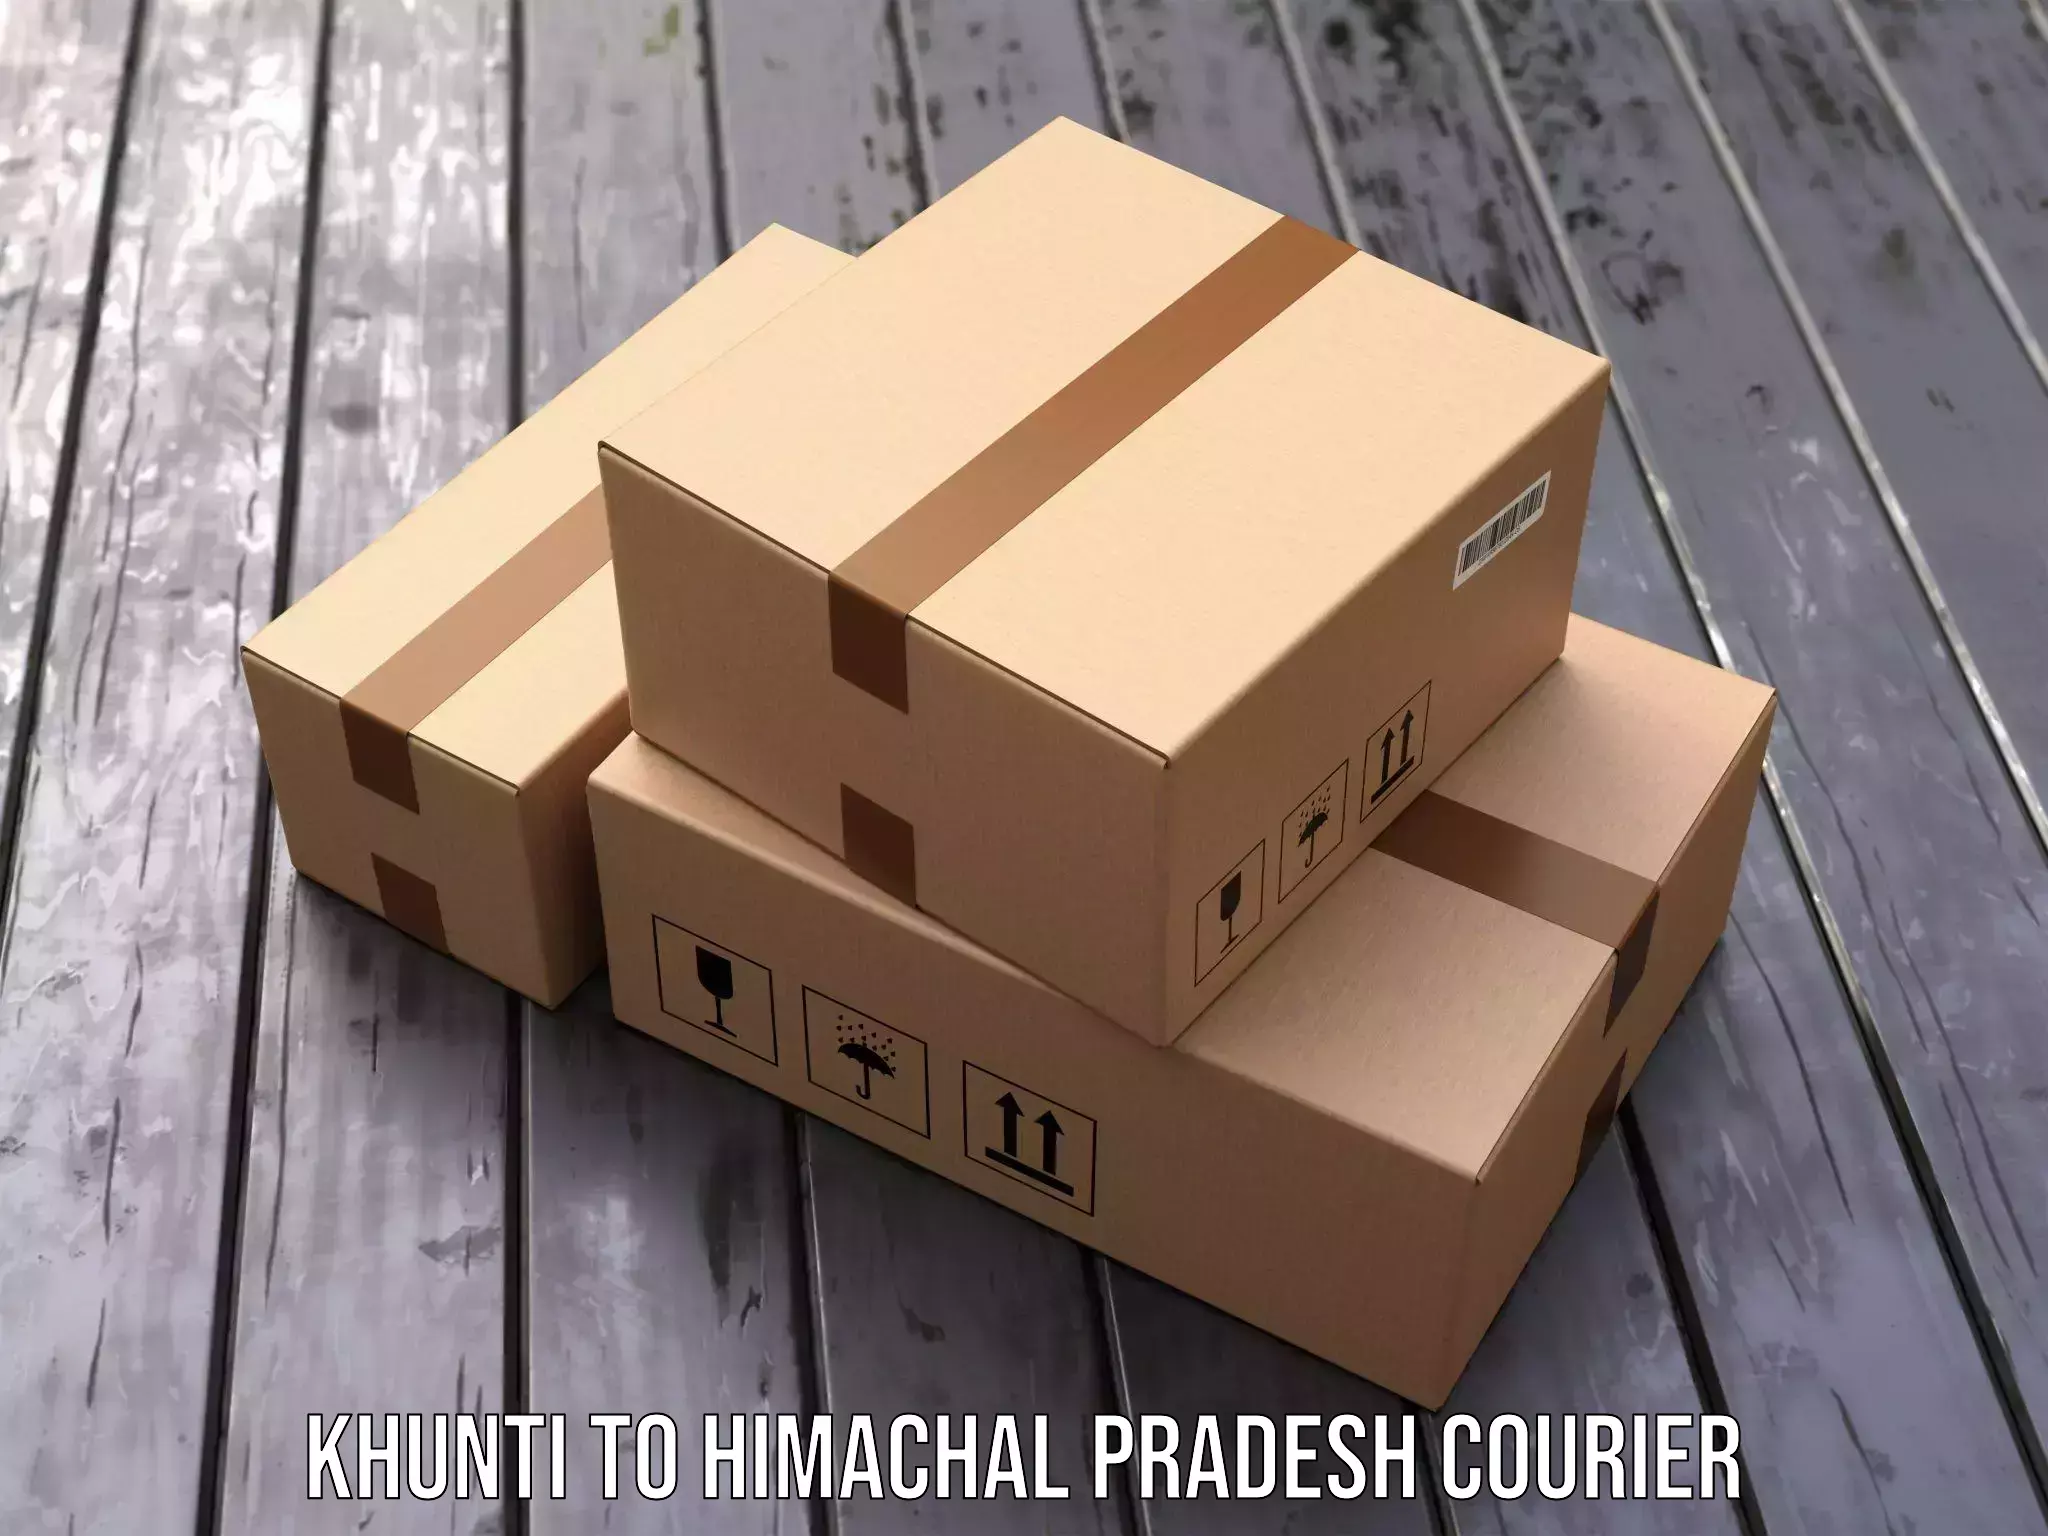 Global shipping networks Khunti to Jubbal